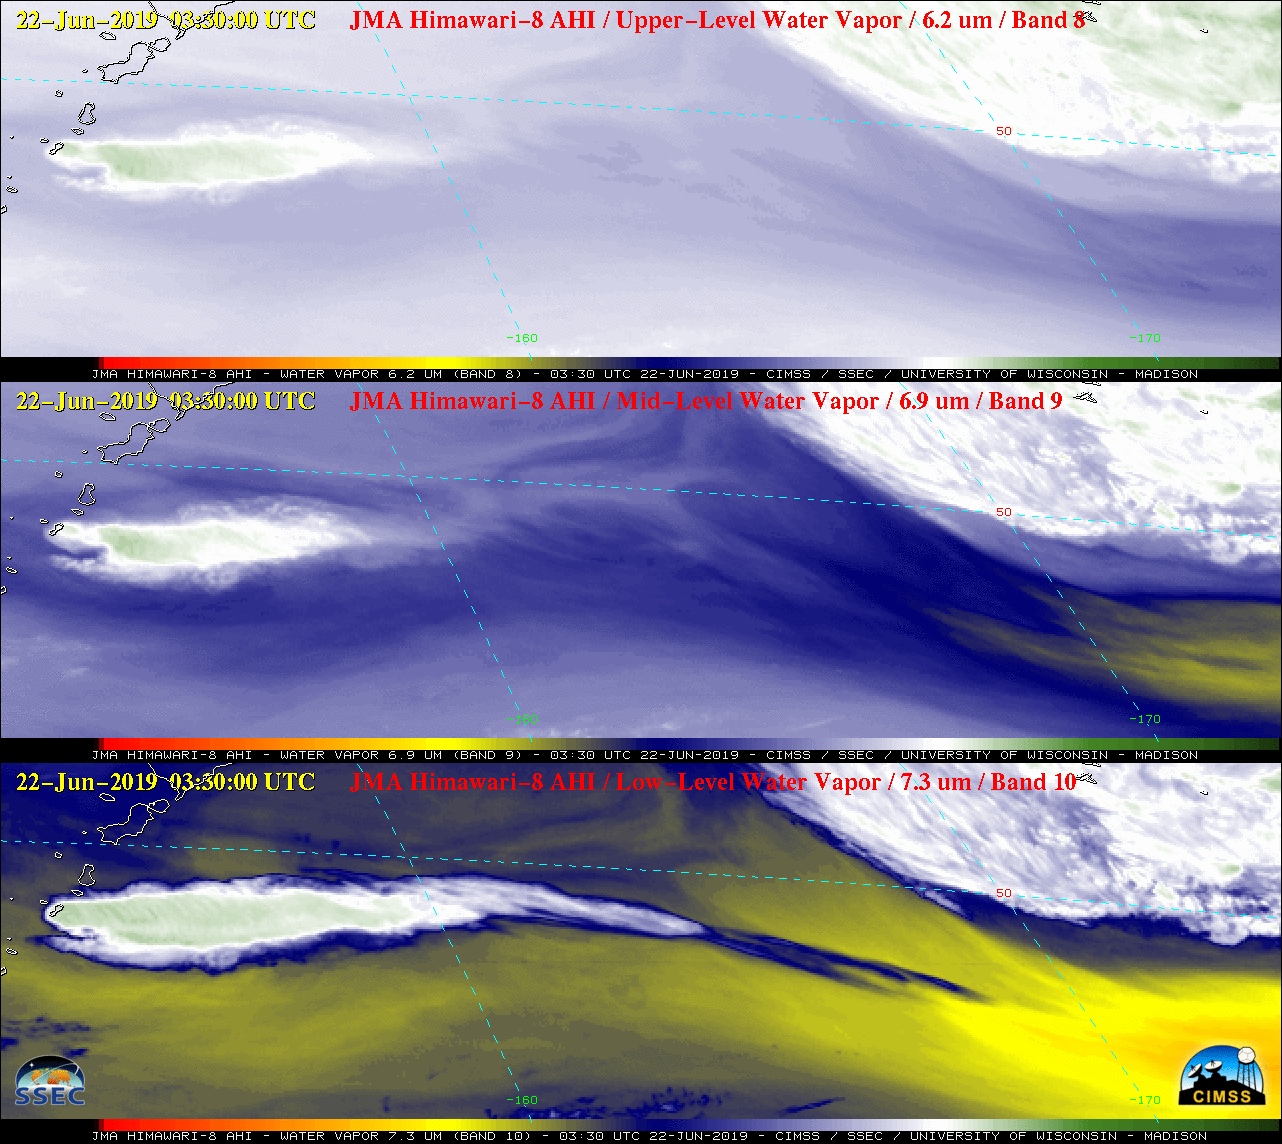 Water Vapor images from Himawari-8: Upper-level (6.2 µm, top), Mid-level (6.9 µm, middle) and Low-level (7.3 µm, bottom) [click to play animation | MP4]